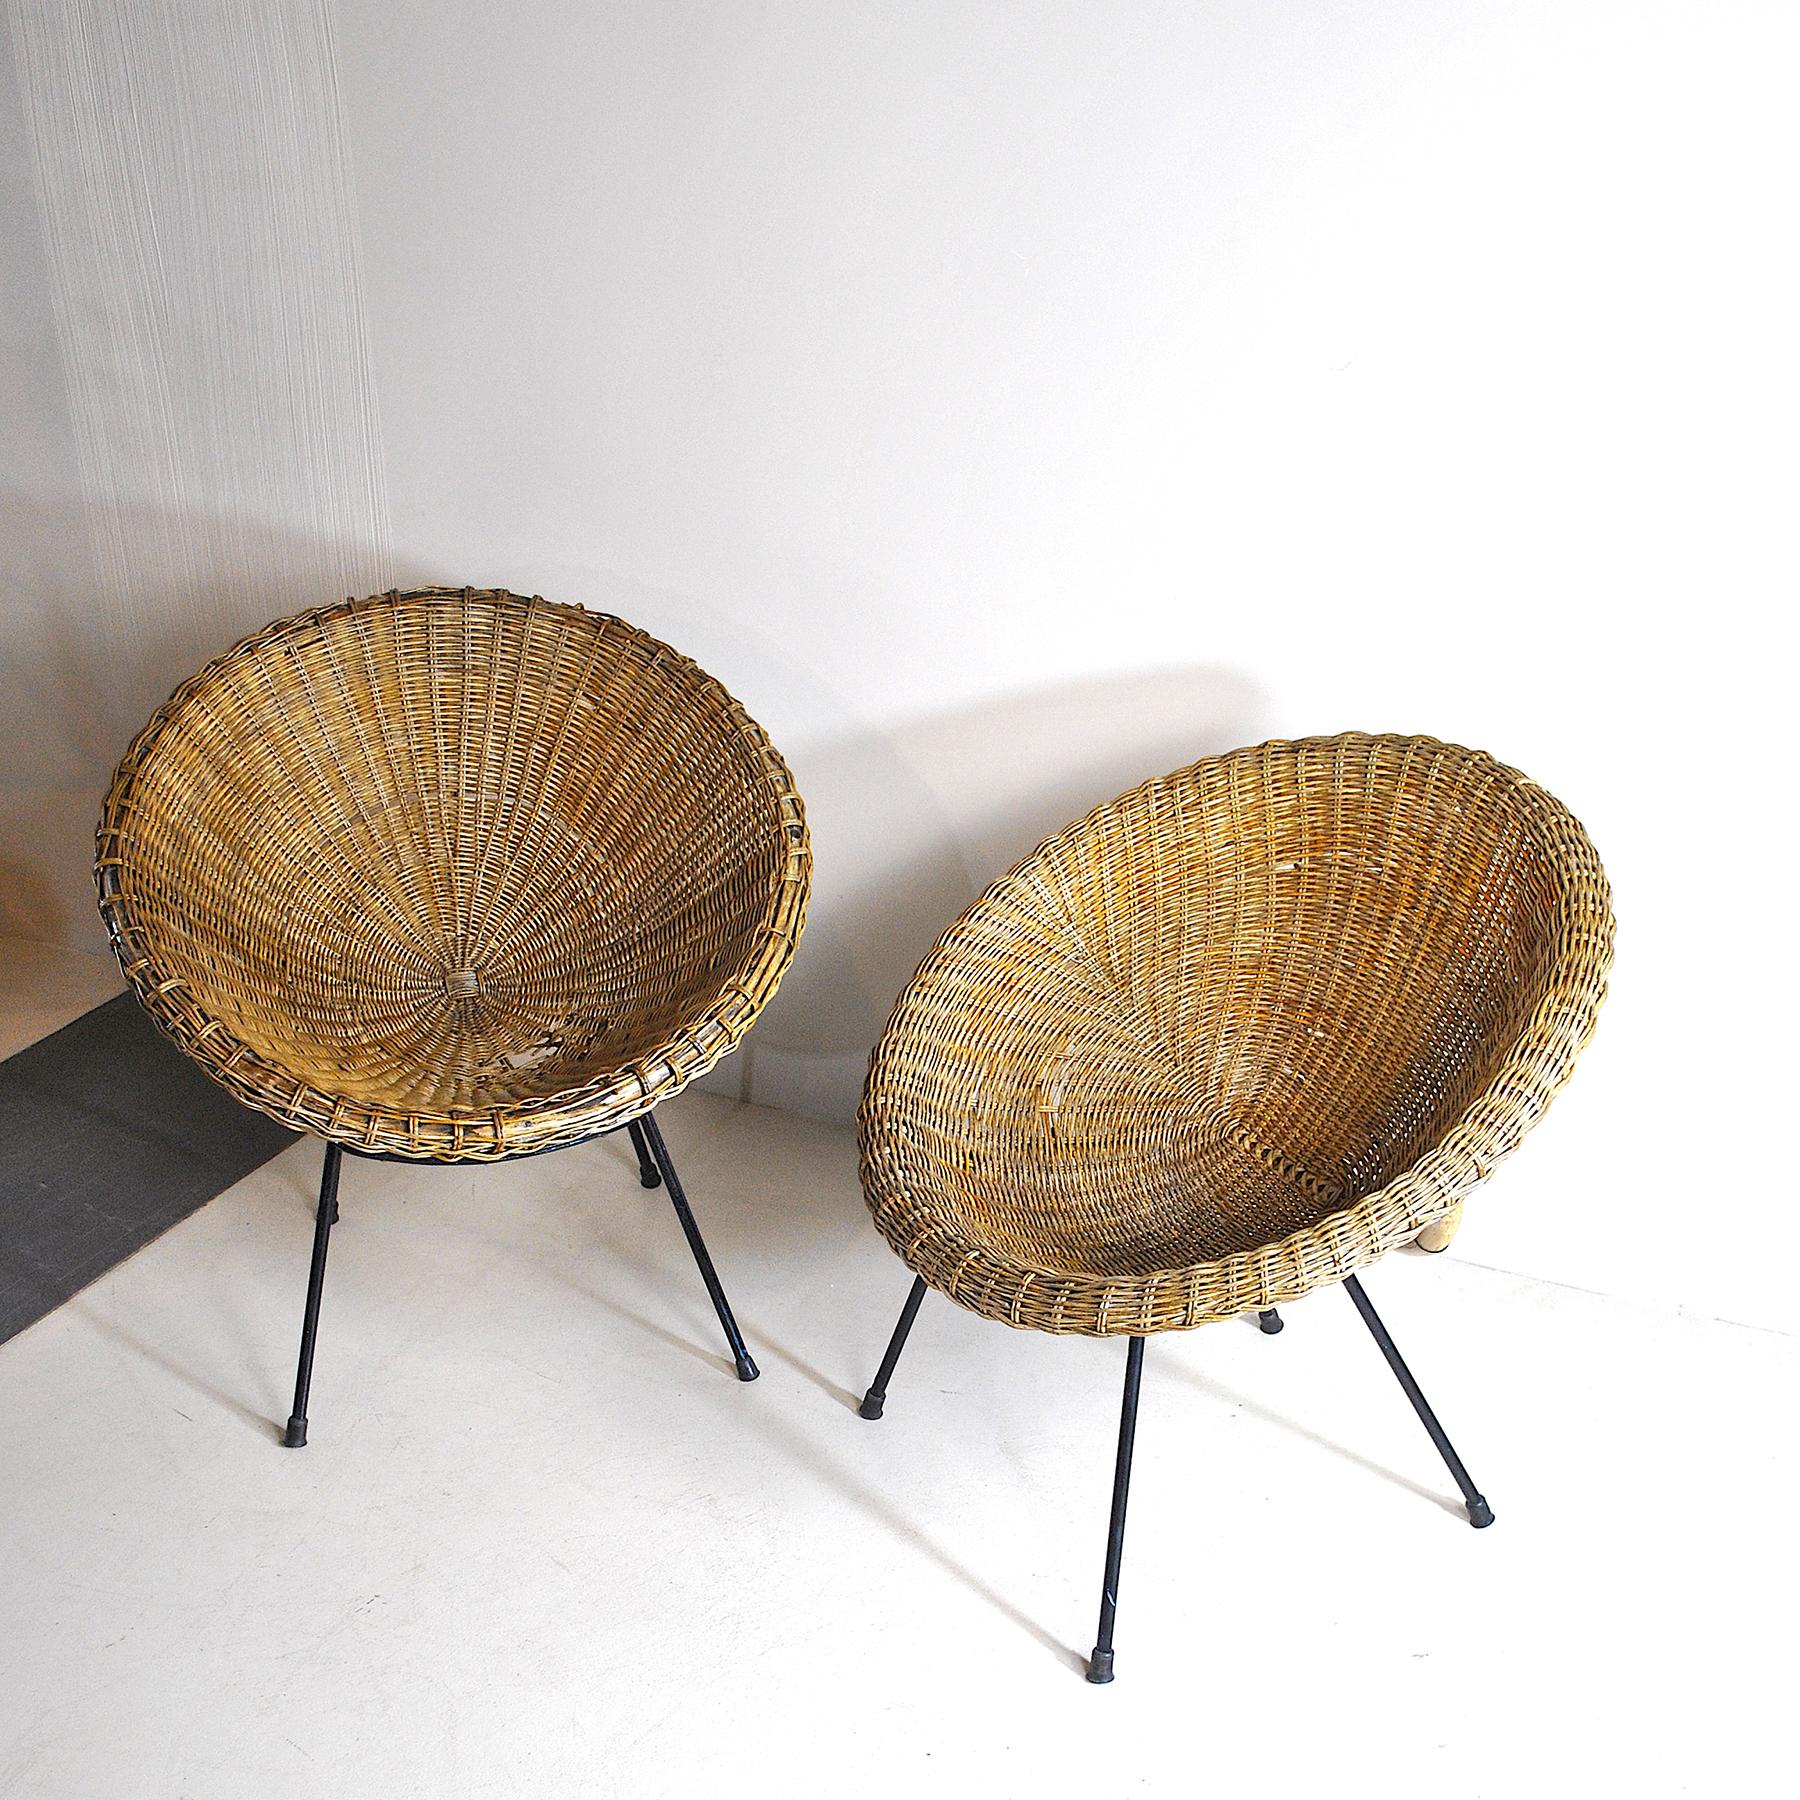 Mid-20th Century Italian Midcentury 1960s Eggs Cane Chairs For Sale